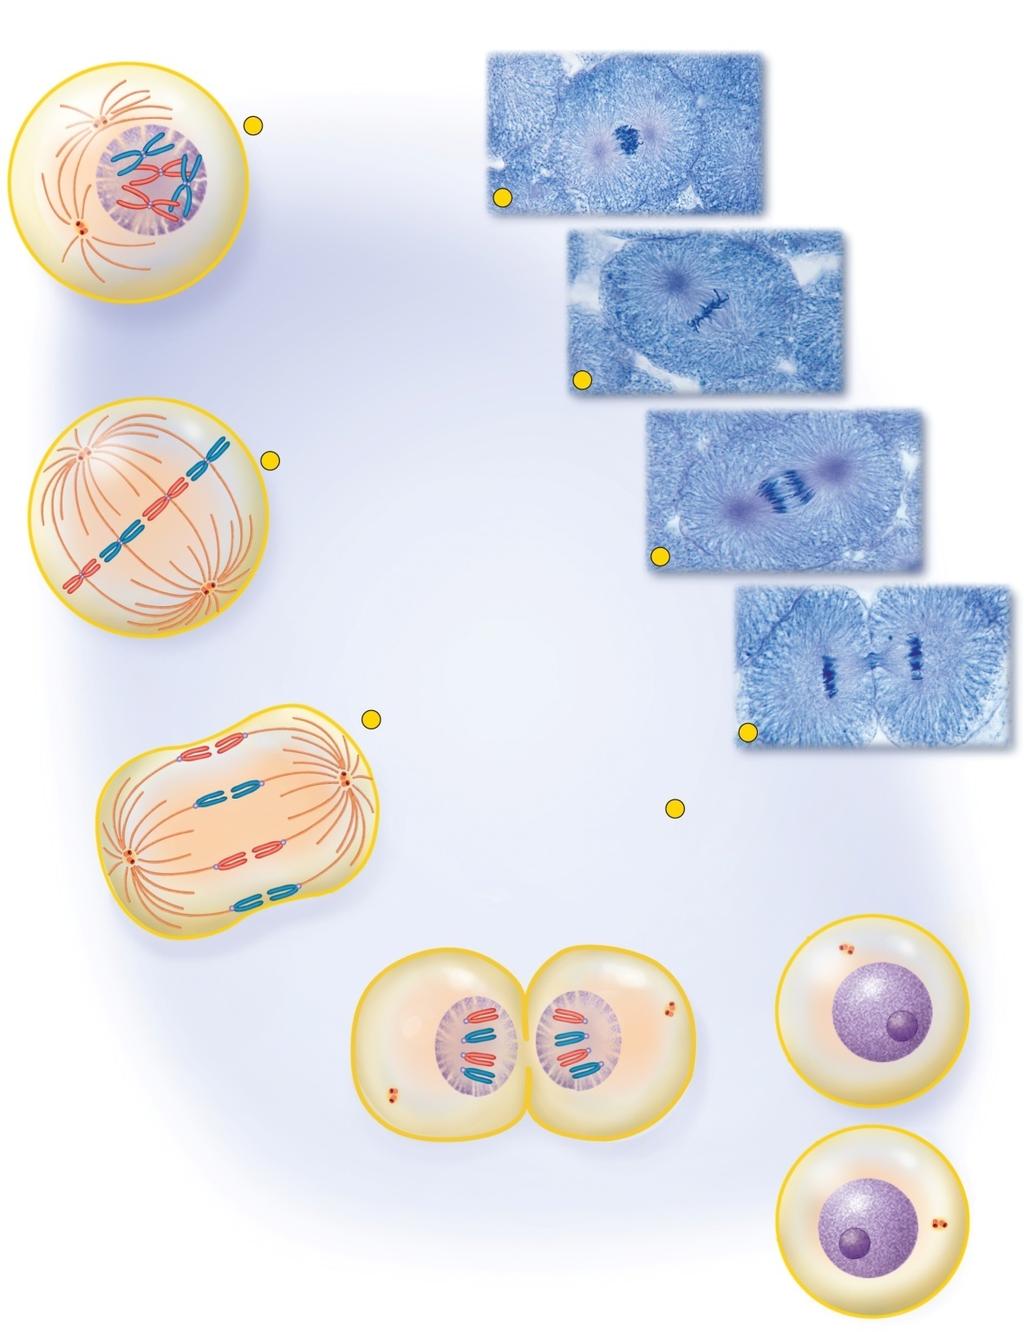 Fig. 4.16 opyright McGraw-Hill Education. Permission required for reproduction or display. 1 Prophase hromosomes condense and nuclear envelope breaks down. Spindle fibers grow from centrioles.